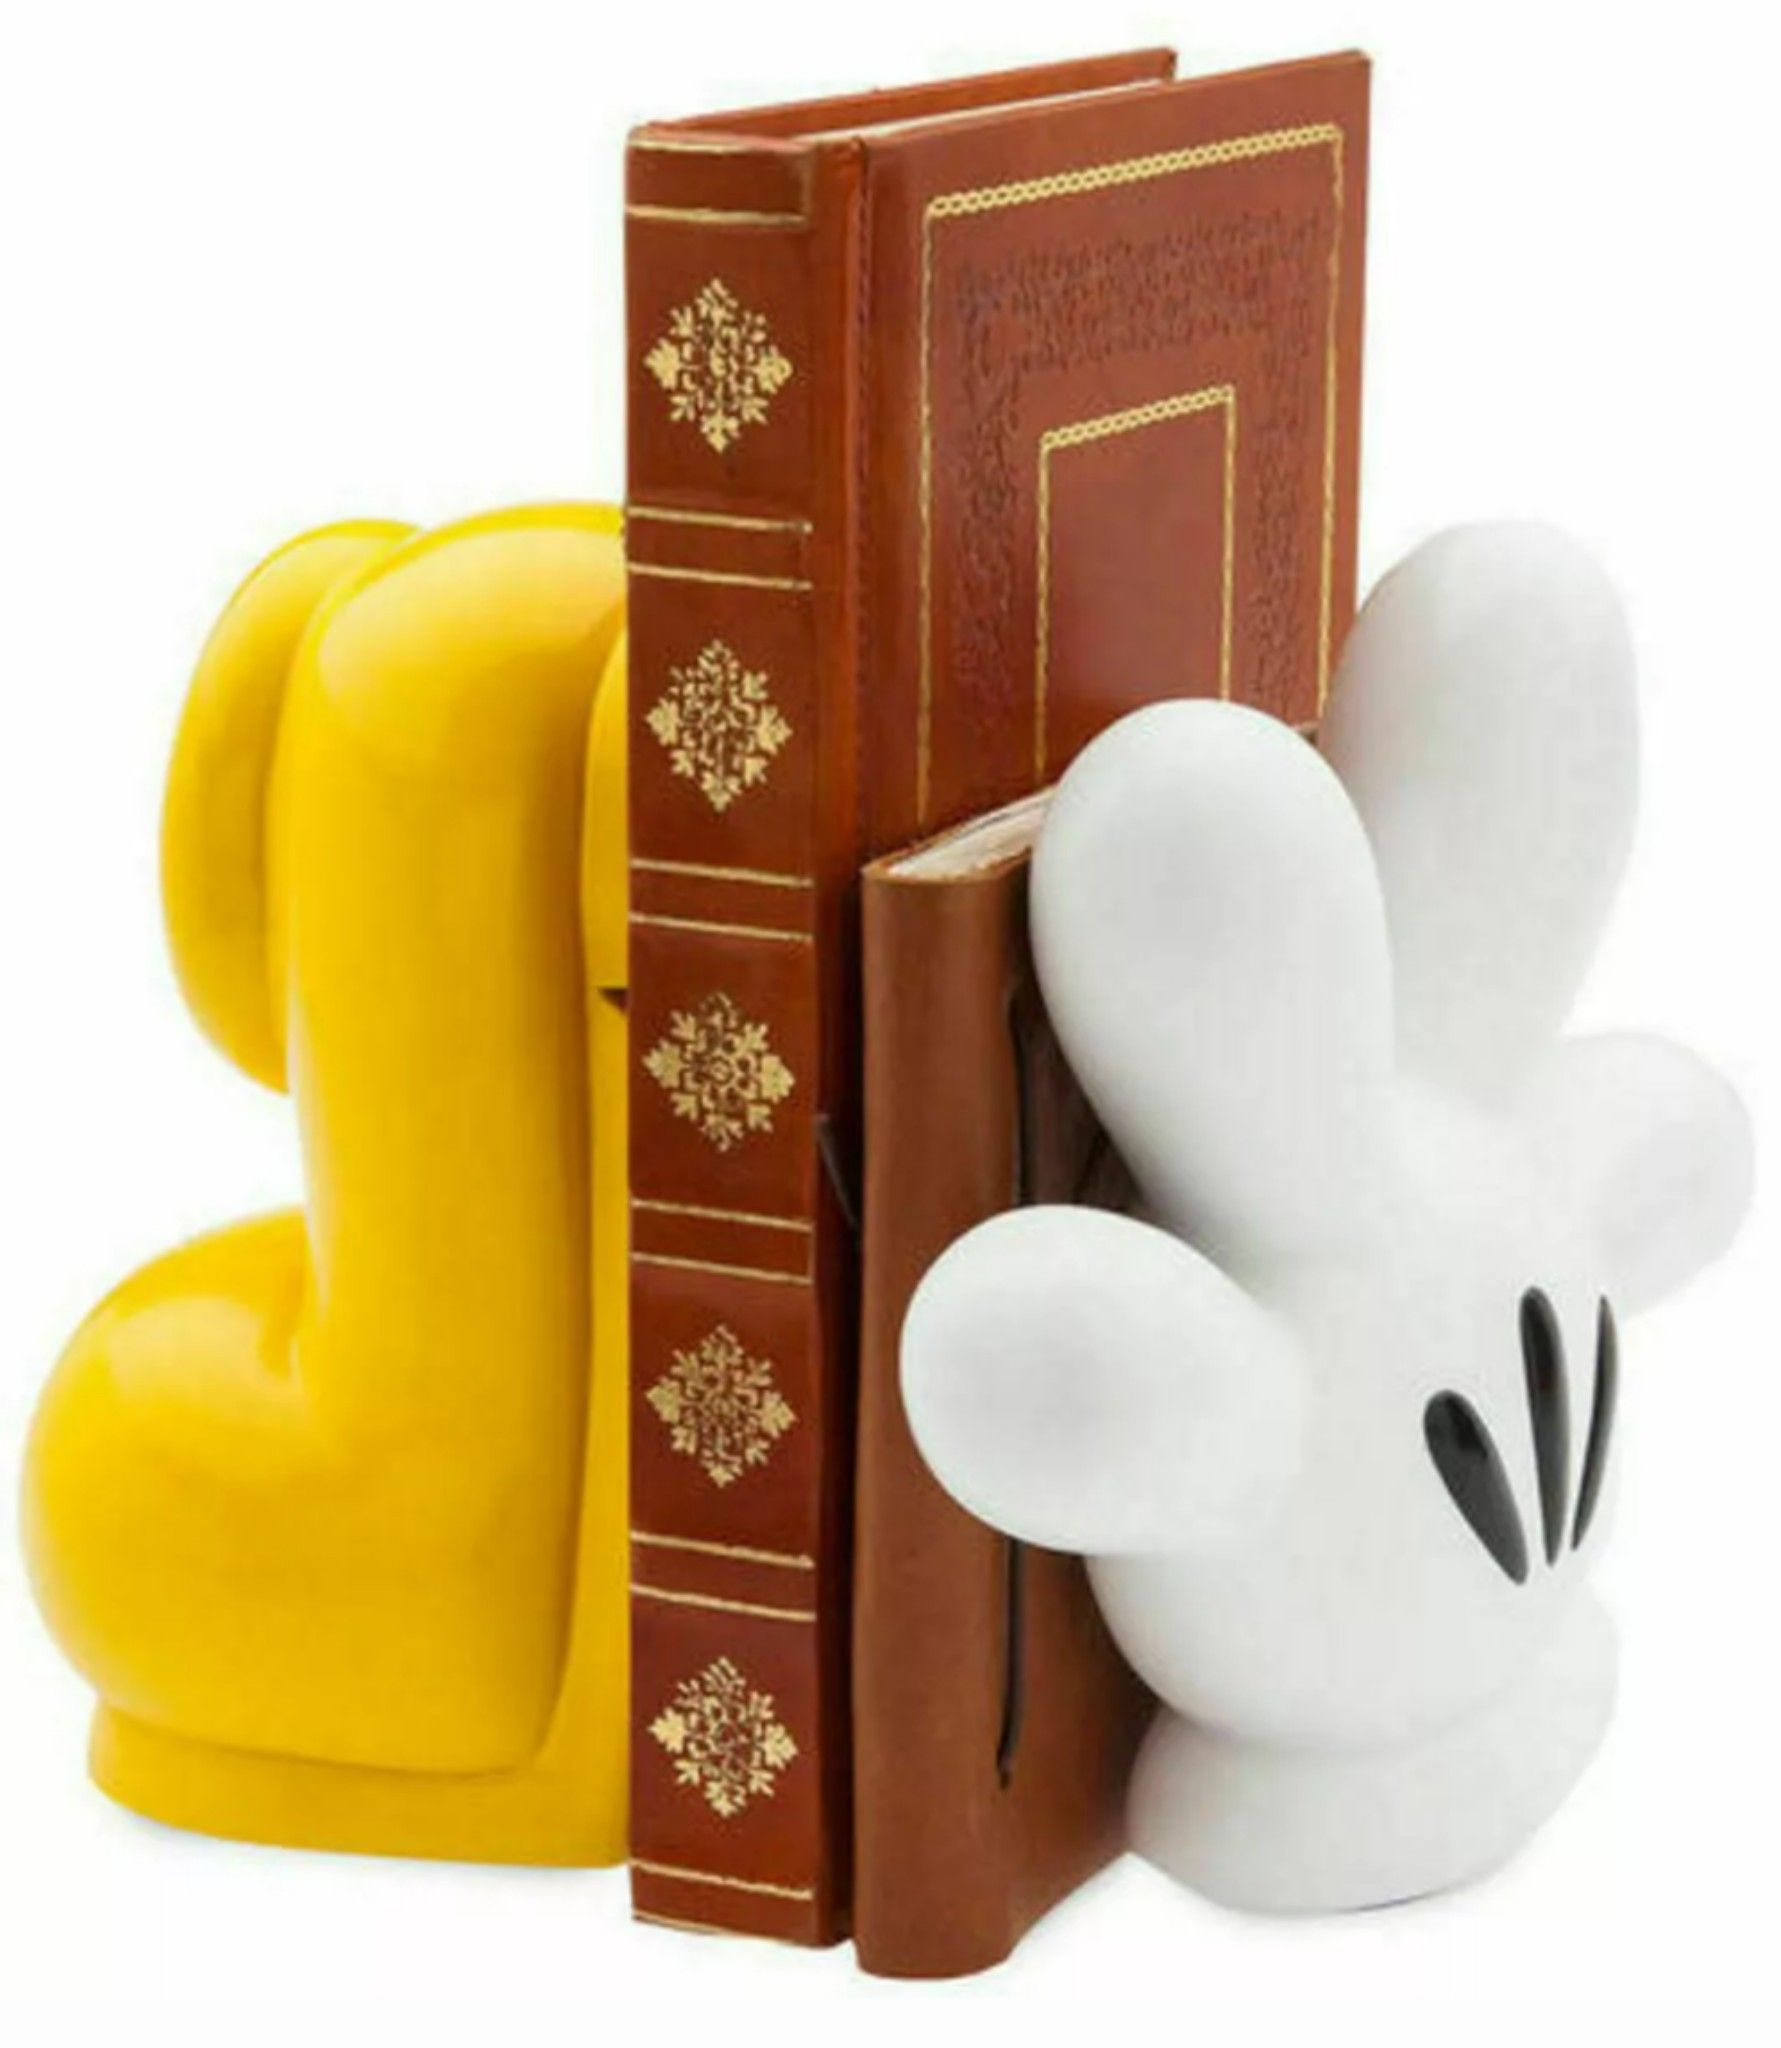 NEW - Disney Mickey Glove and Shoe Bookends